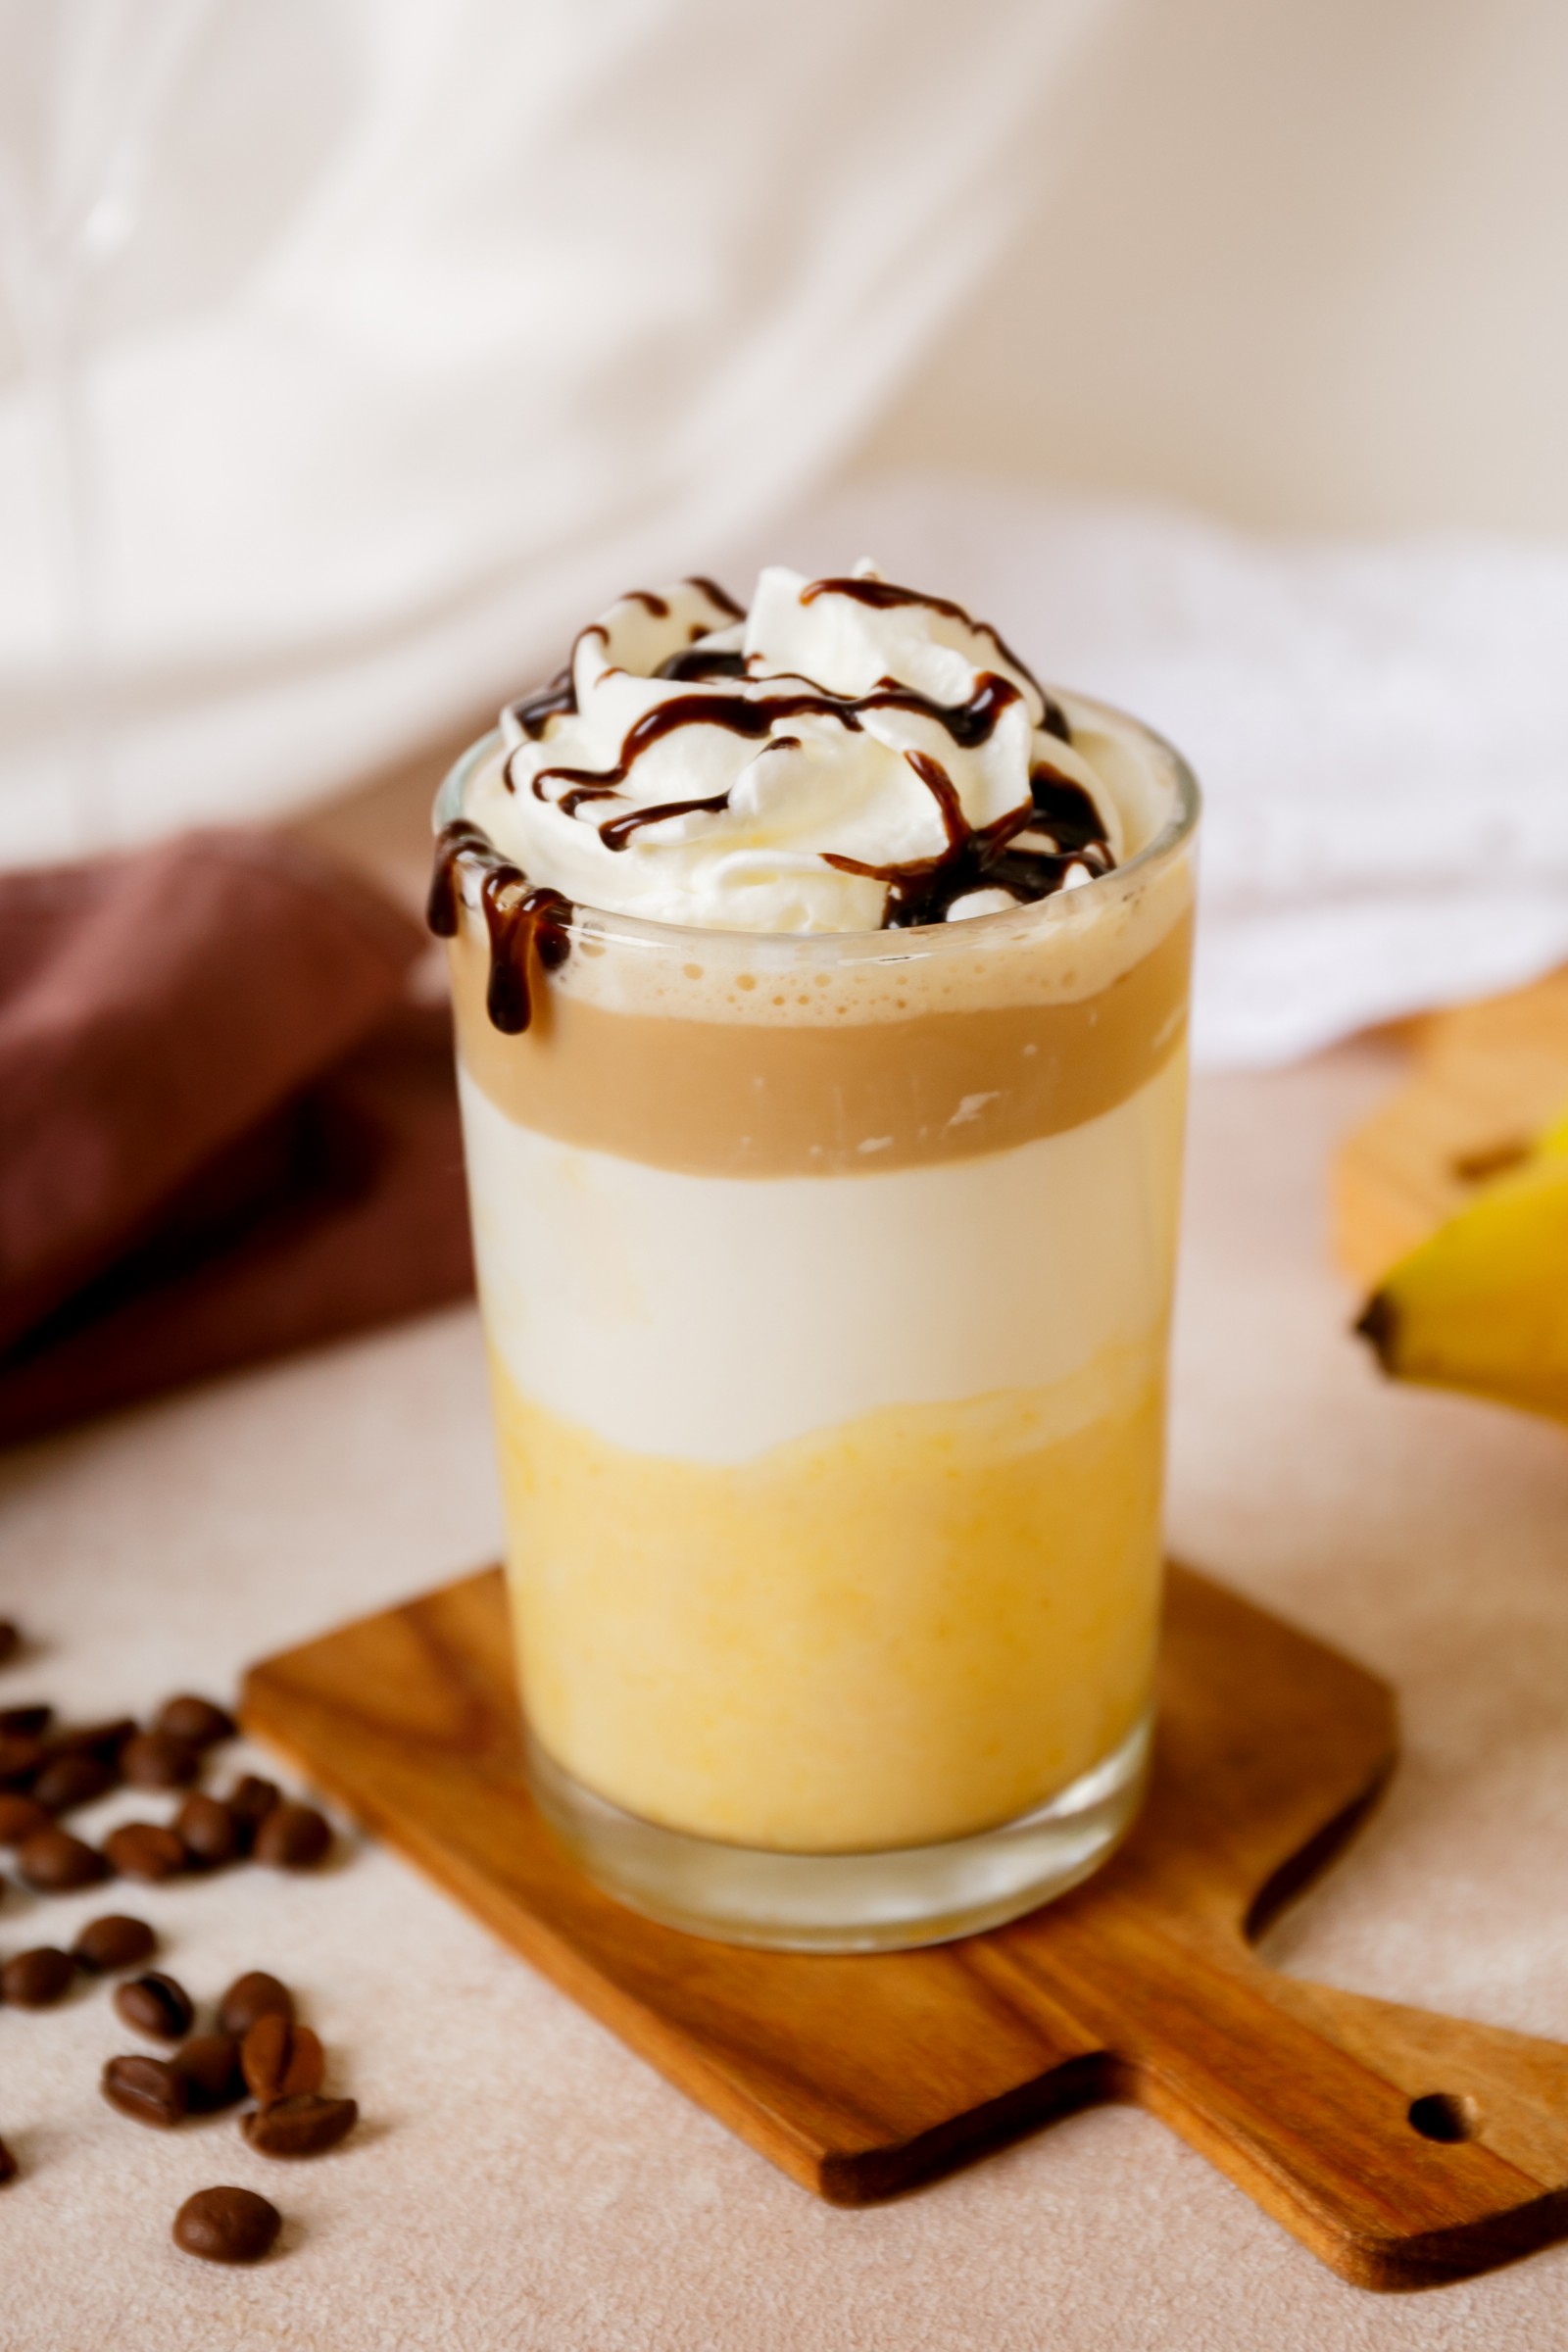 Starbucks Copycat Banana Split Frappuccino is the Frosty Drink You Need to Make This Summer!